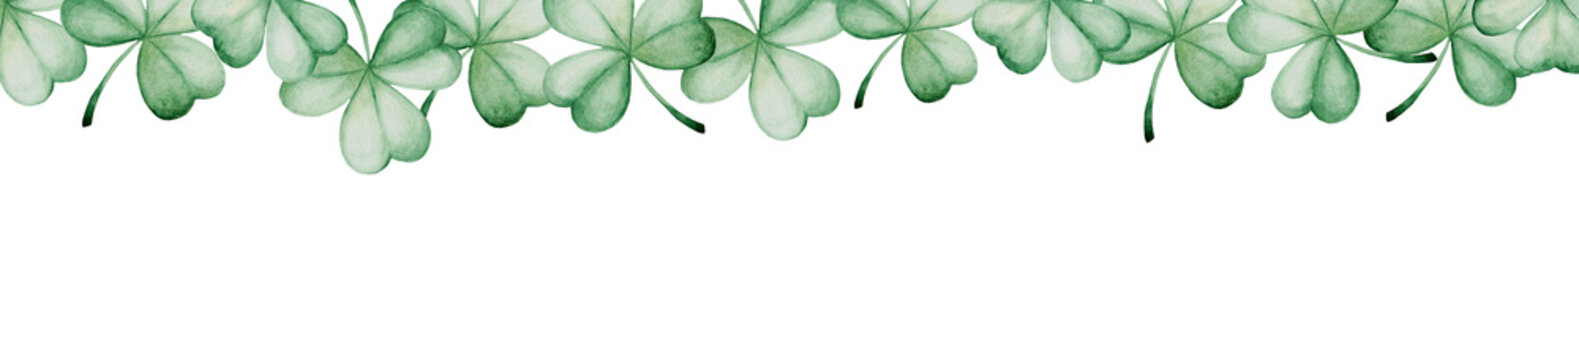 Watercolor Saint Patrick's Day banner. Clover ornament. For design, print or background